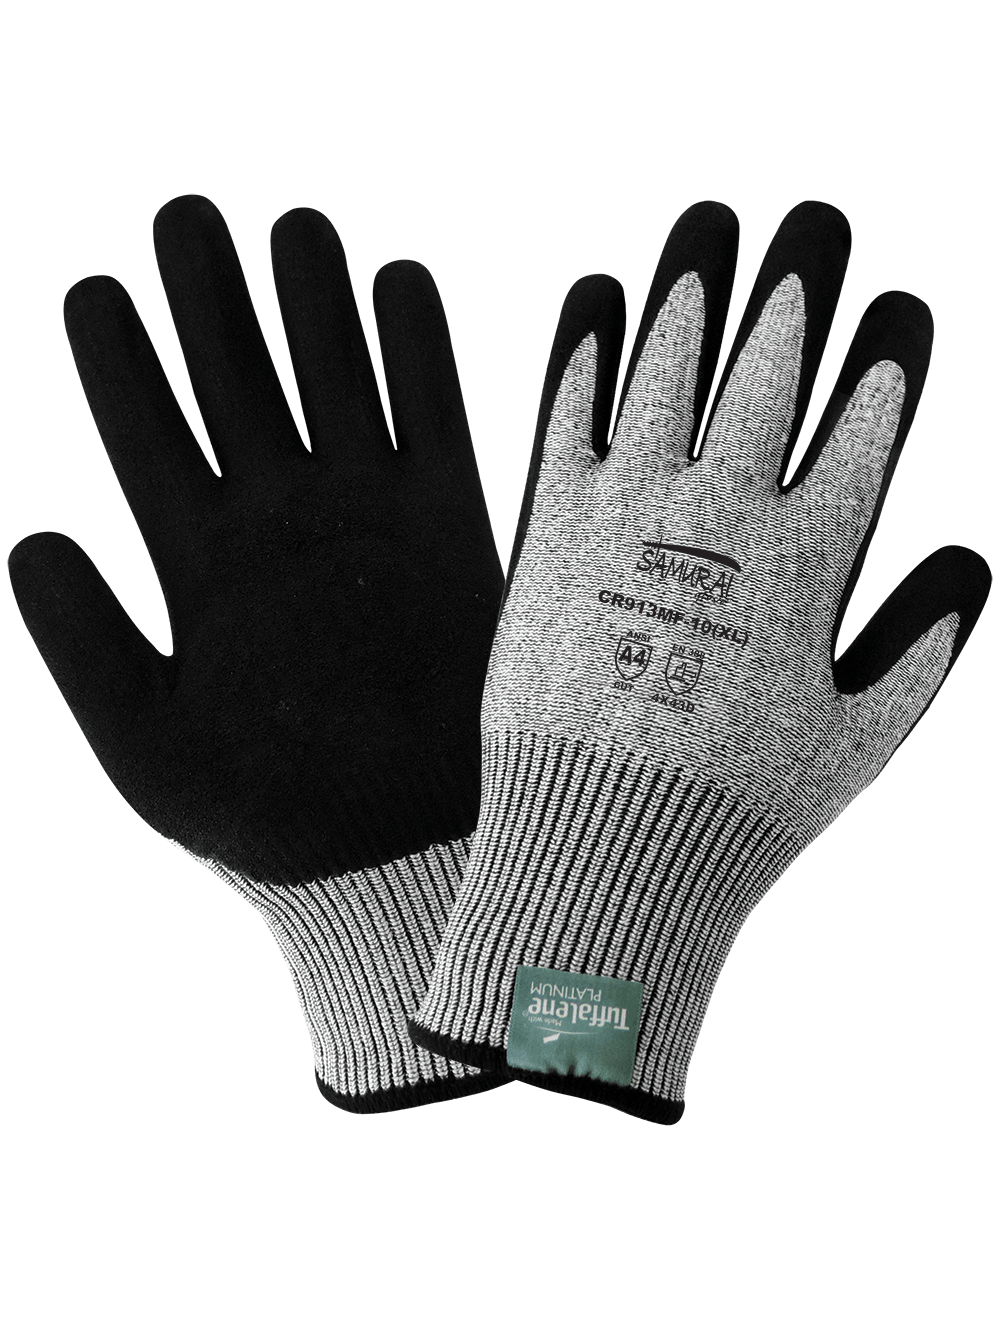 Samurai Glove® Salt-and-Pepper Tuffalene® Platinum Cut, Abrasion, and Puncture Resistant Gloves Free from Enhancements - LIMITED STOCK - CR913MF